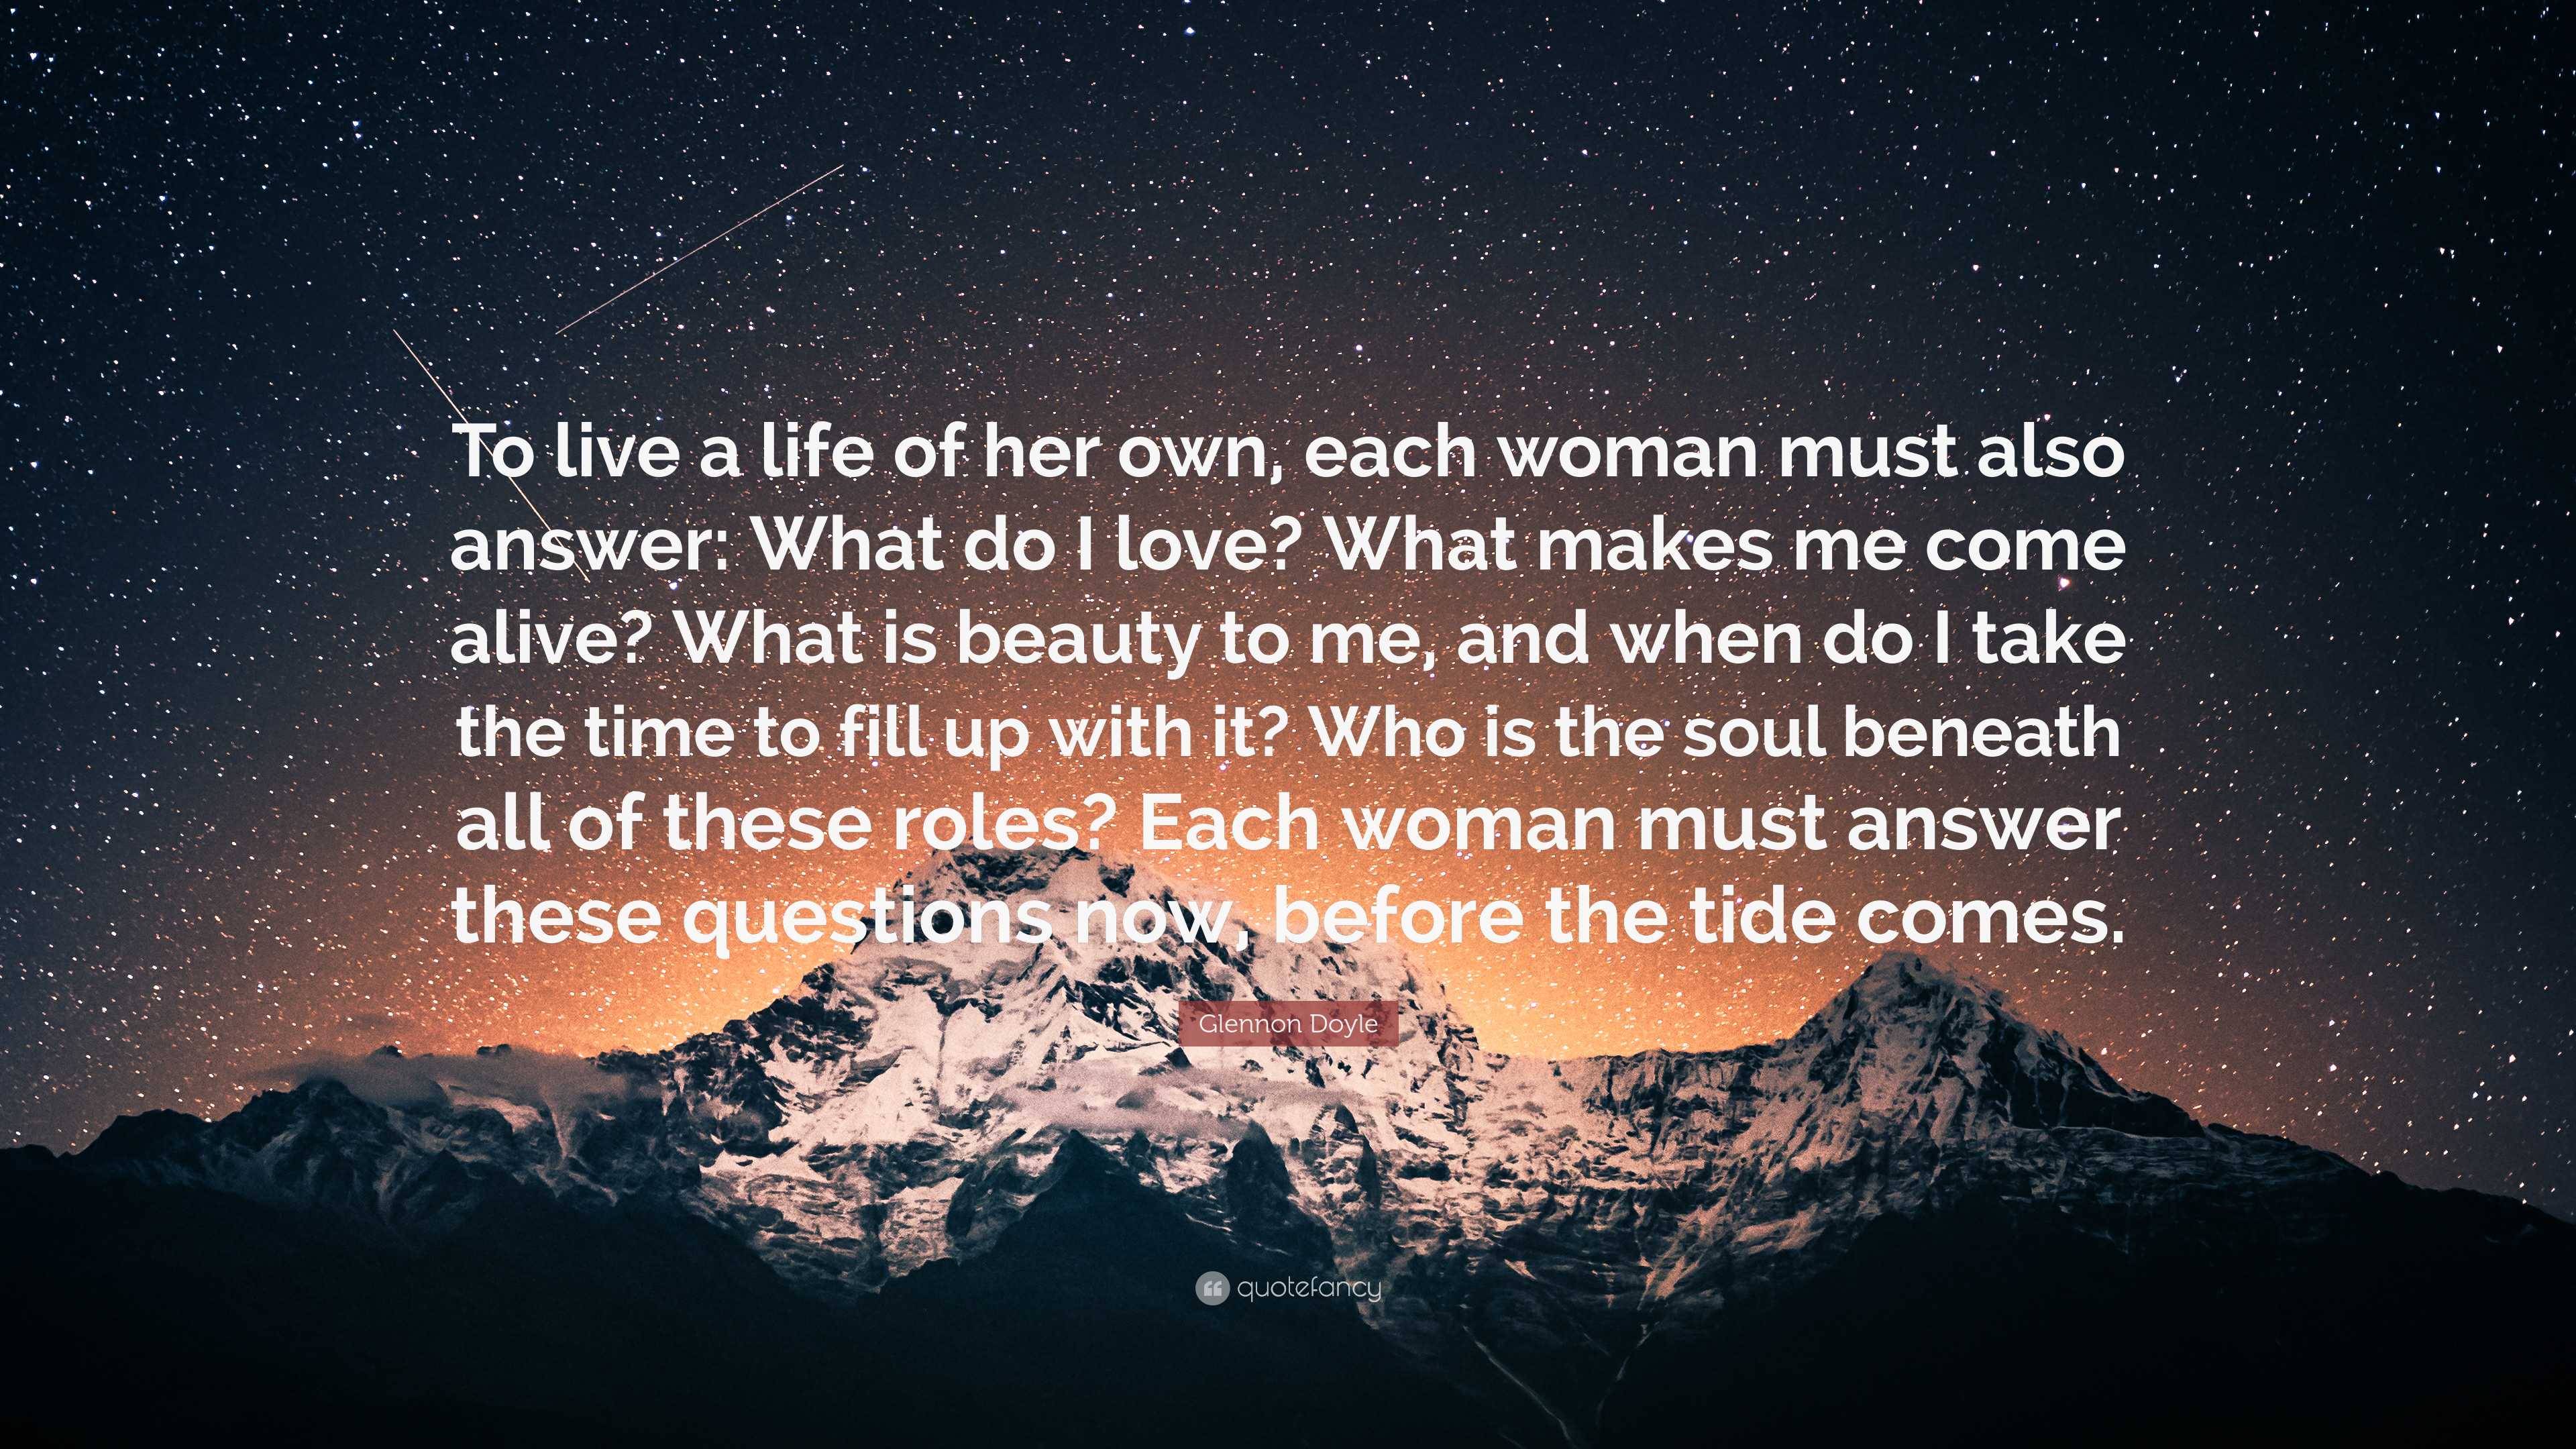 Glennon Doyle Quote: “To live a life of her own, each woman must also  answer: What do I love? What makes me come alive? What is beauty to me, ”